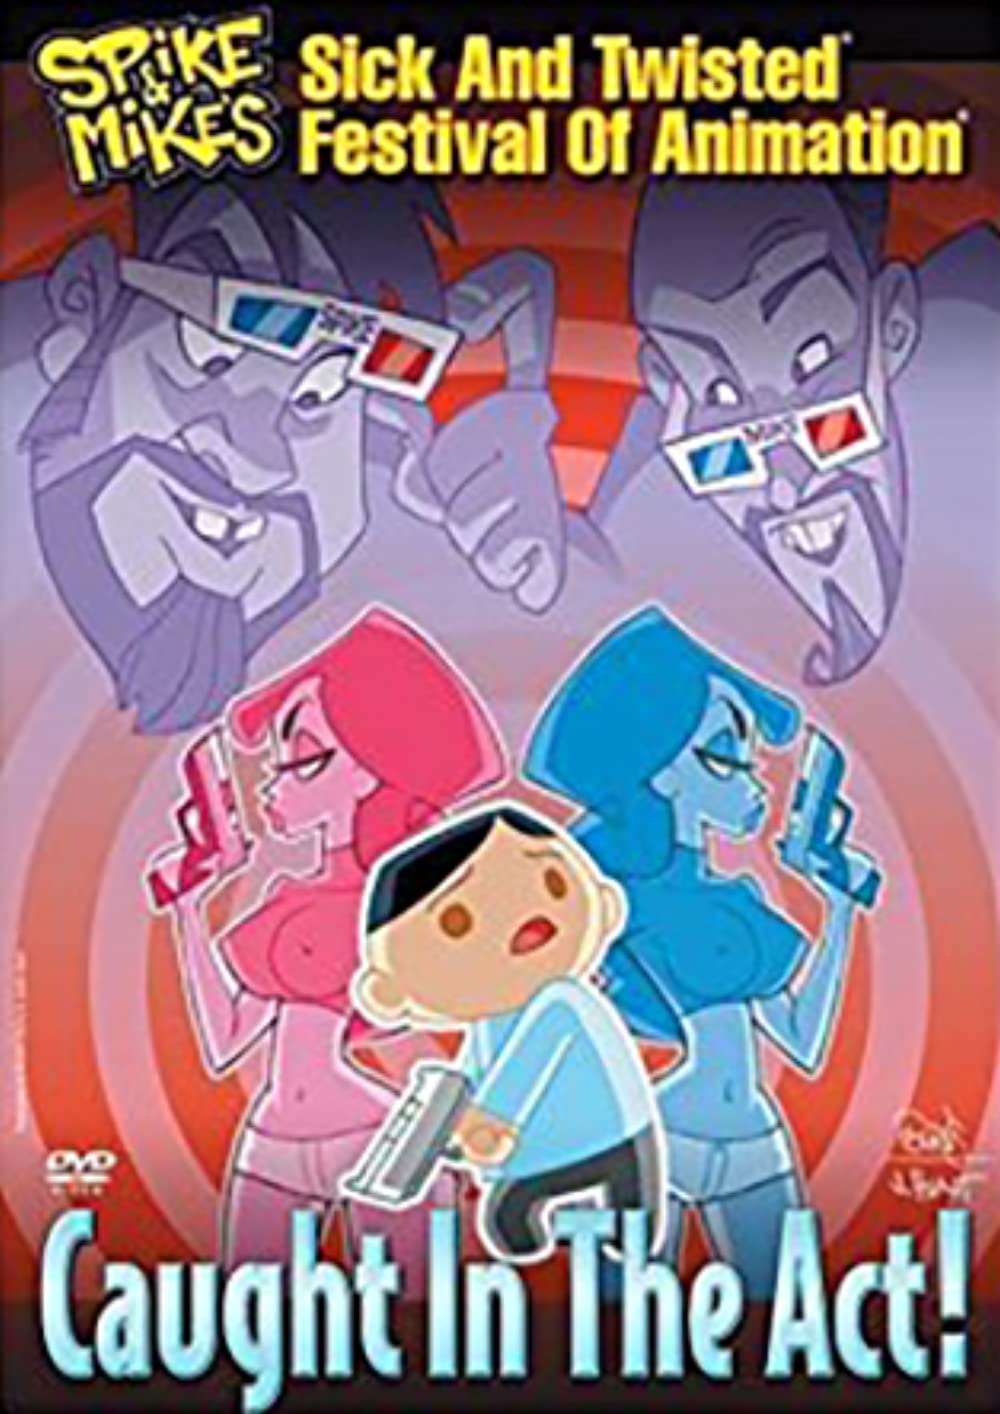 Spike and Mike's Sick and Twisted Festival of Animation: Caught in the Act Movie Download - Spike And Mike's Sick And Twisted Festival Of Animation: Caught In The Act